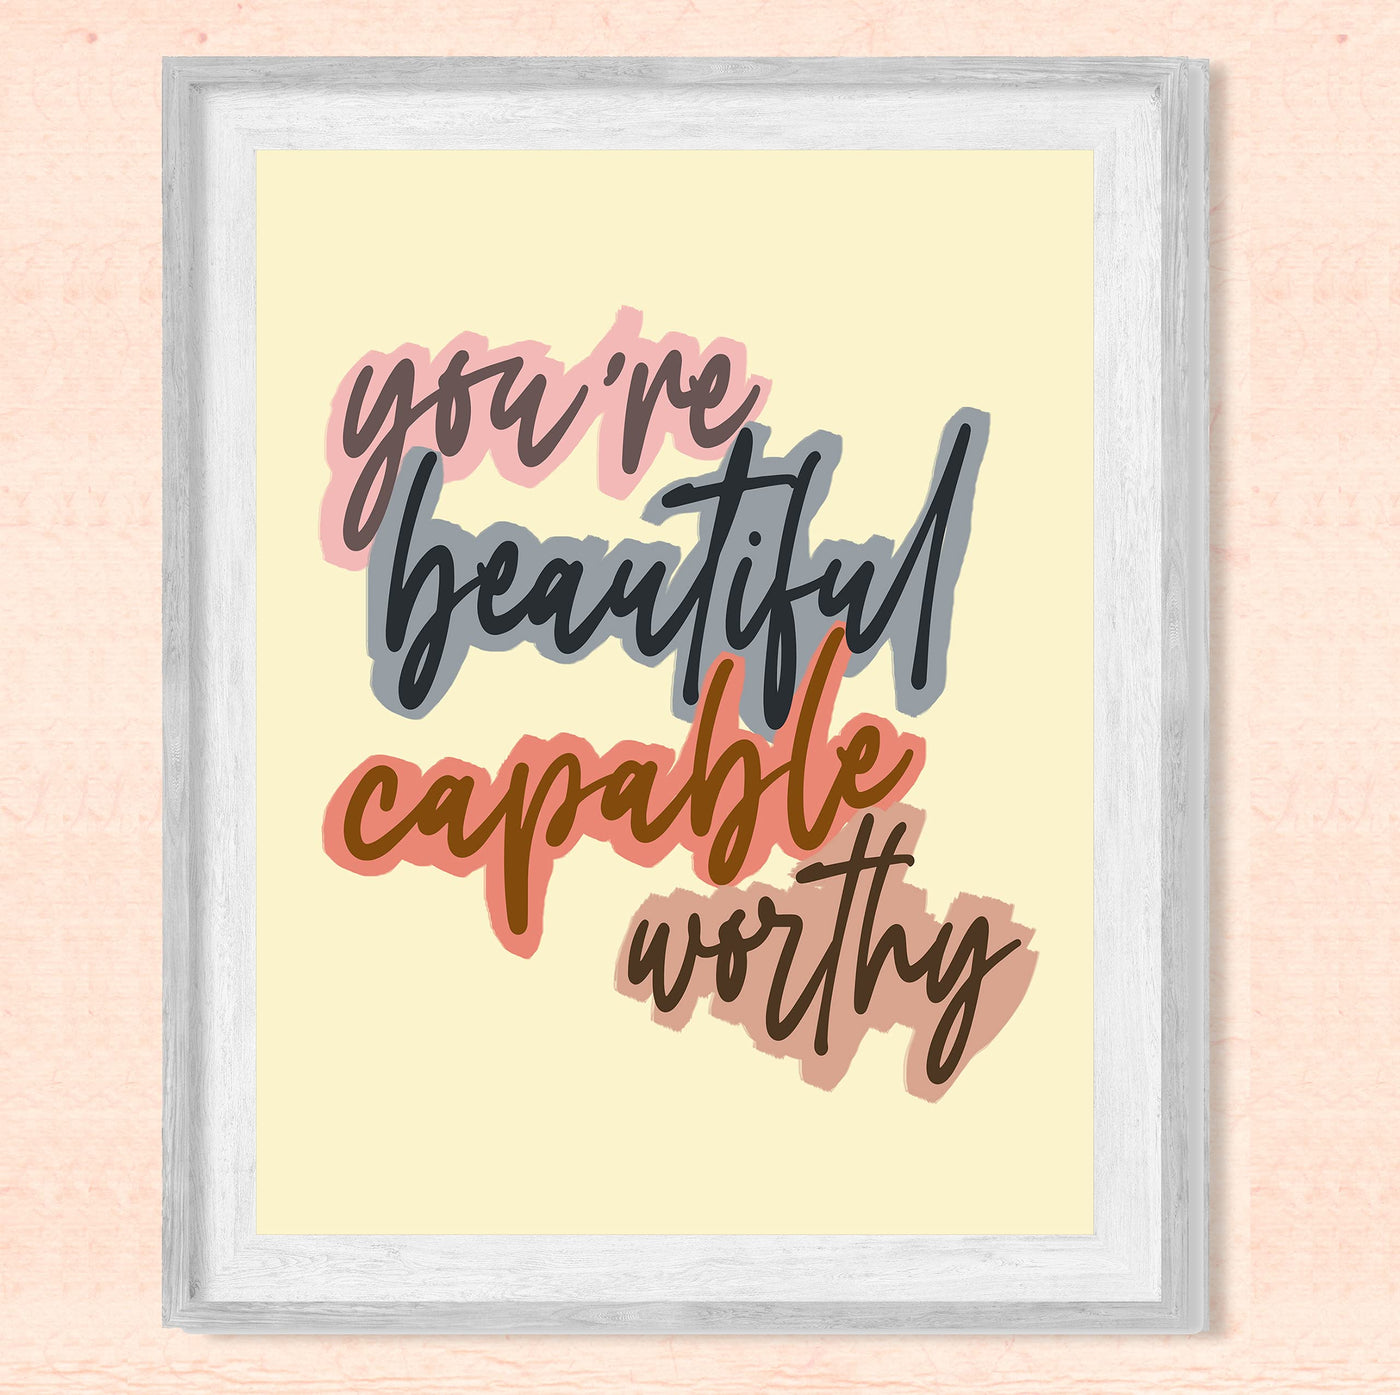 You're Beautiful, Capable, Worthy Inspirational Quotes Art Print -8 x 10" Modern Typographic Wall Decor-Ready to Frame. Great Motivational Decoration. Perfect Gift to Empower Women & Teen Girls!